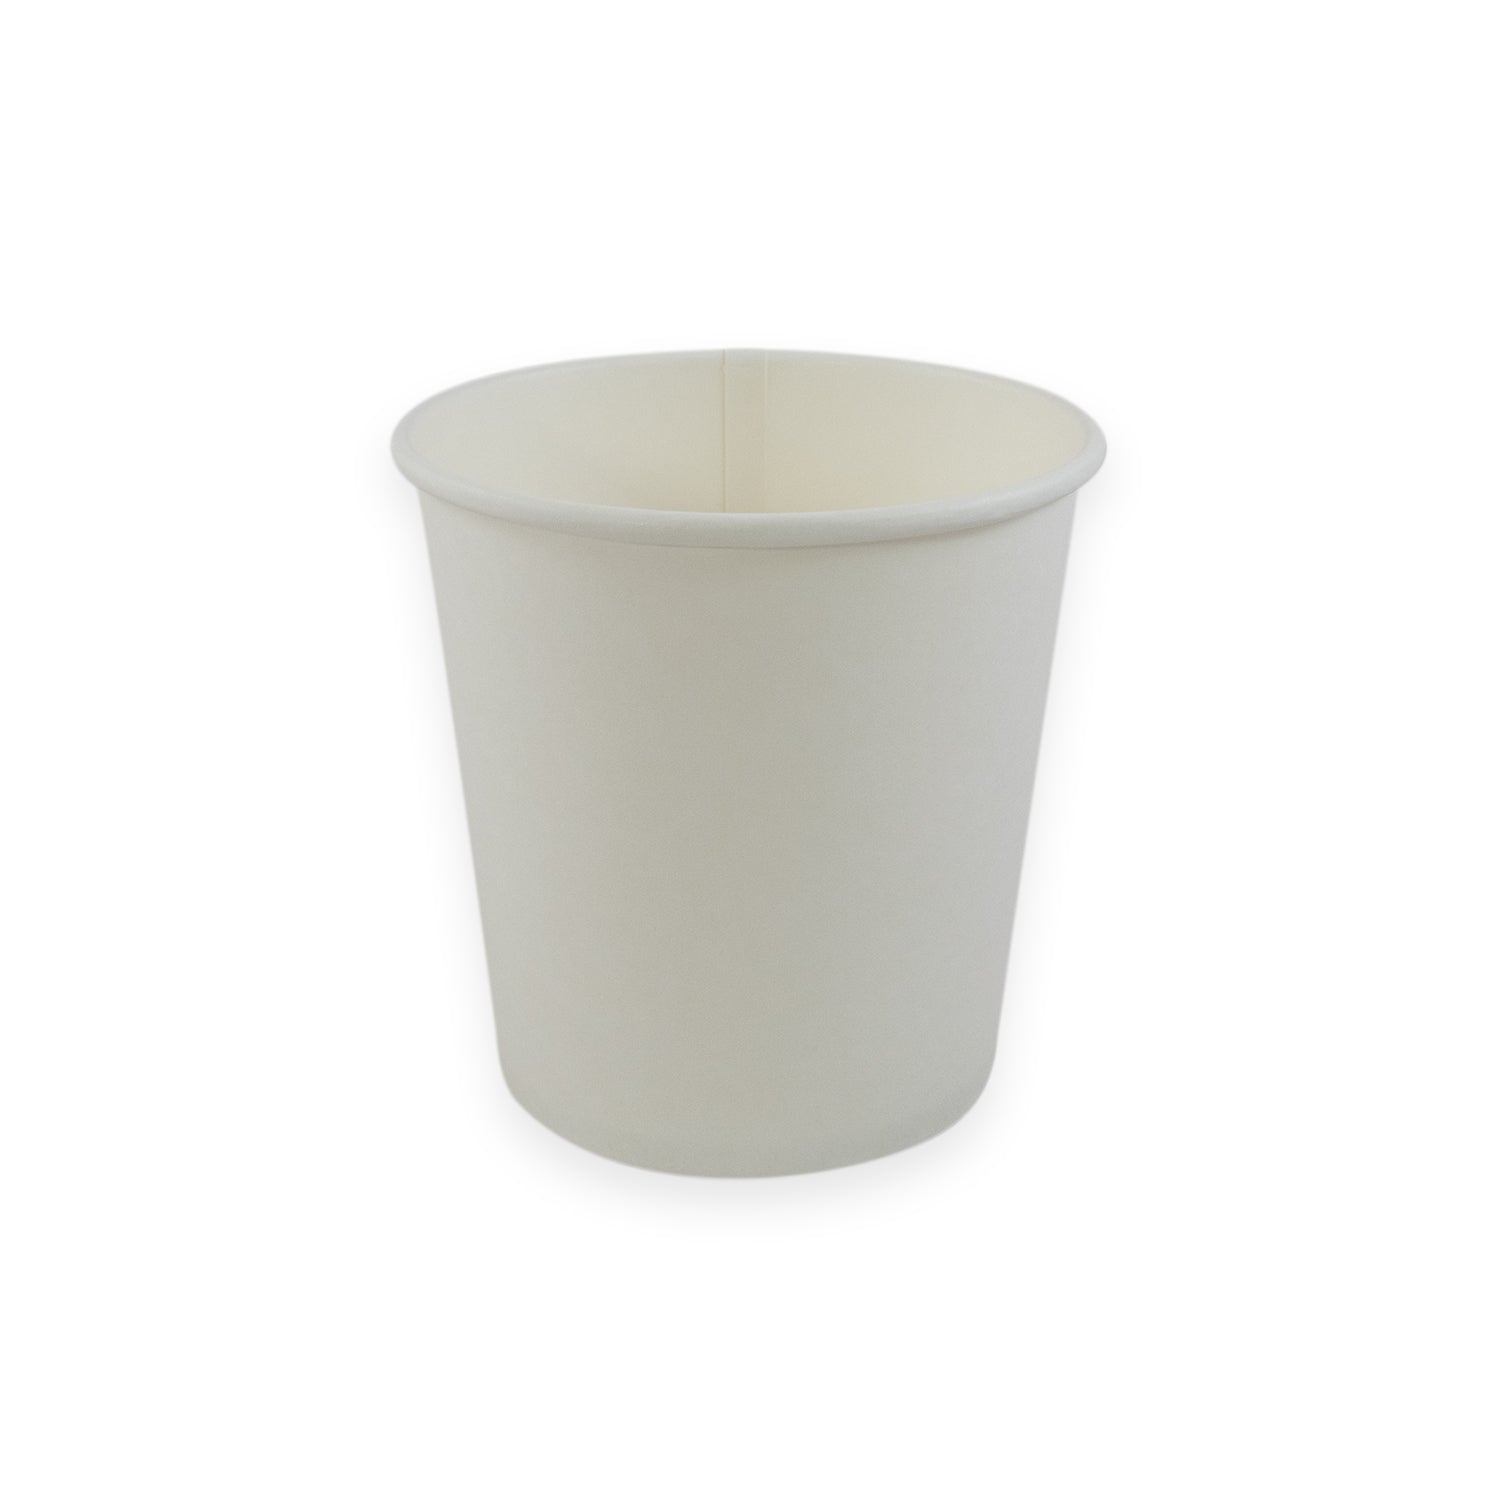 Sustain Sustain Paper Round Bowl/Container White 24oz 115mm - CT/500 Disposable Food Packaging Carton of 500 